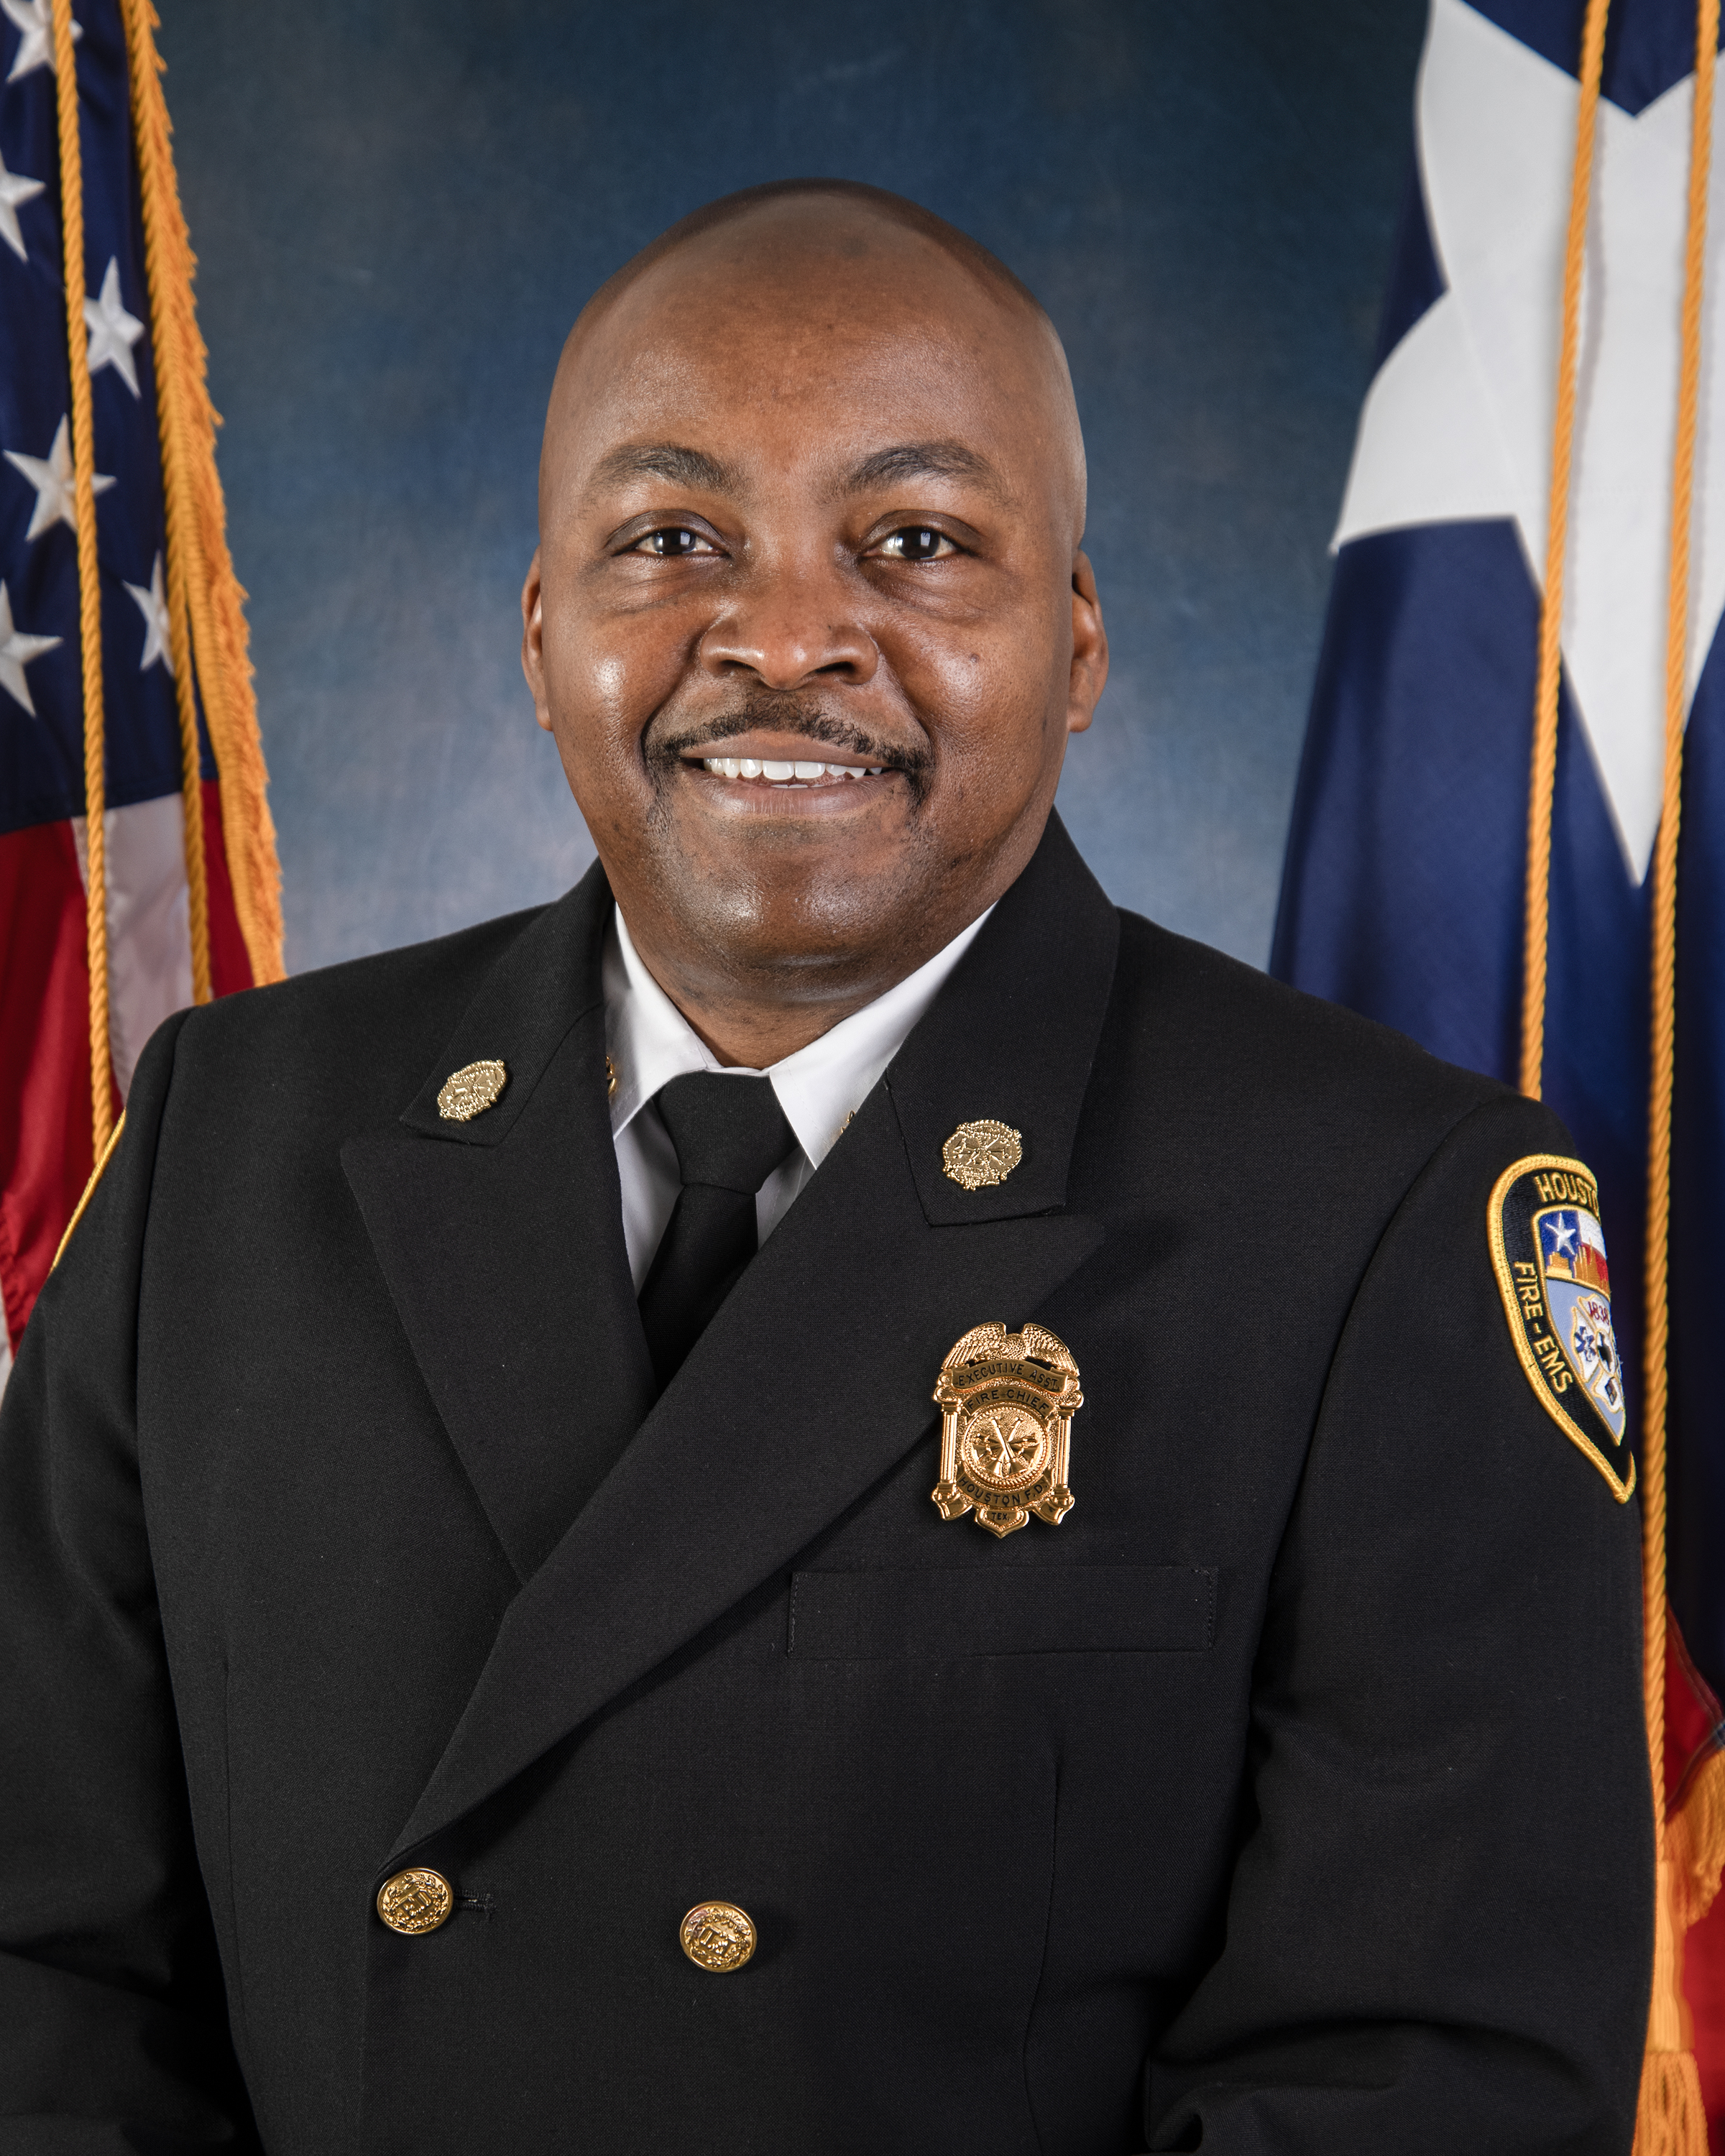 HFD Executive Assistant Chief Rodney West